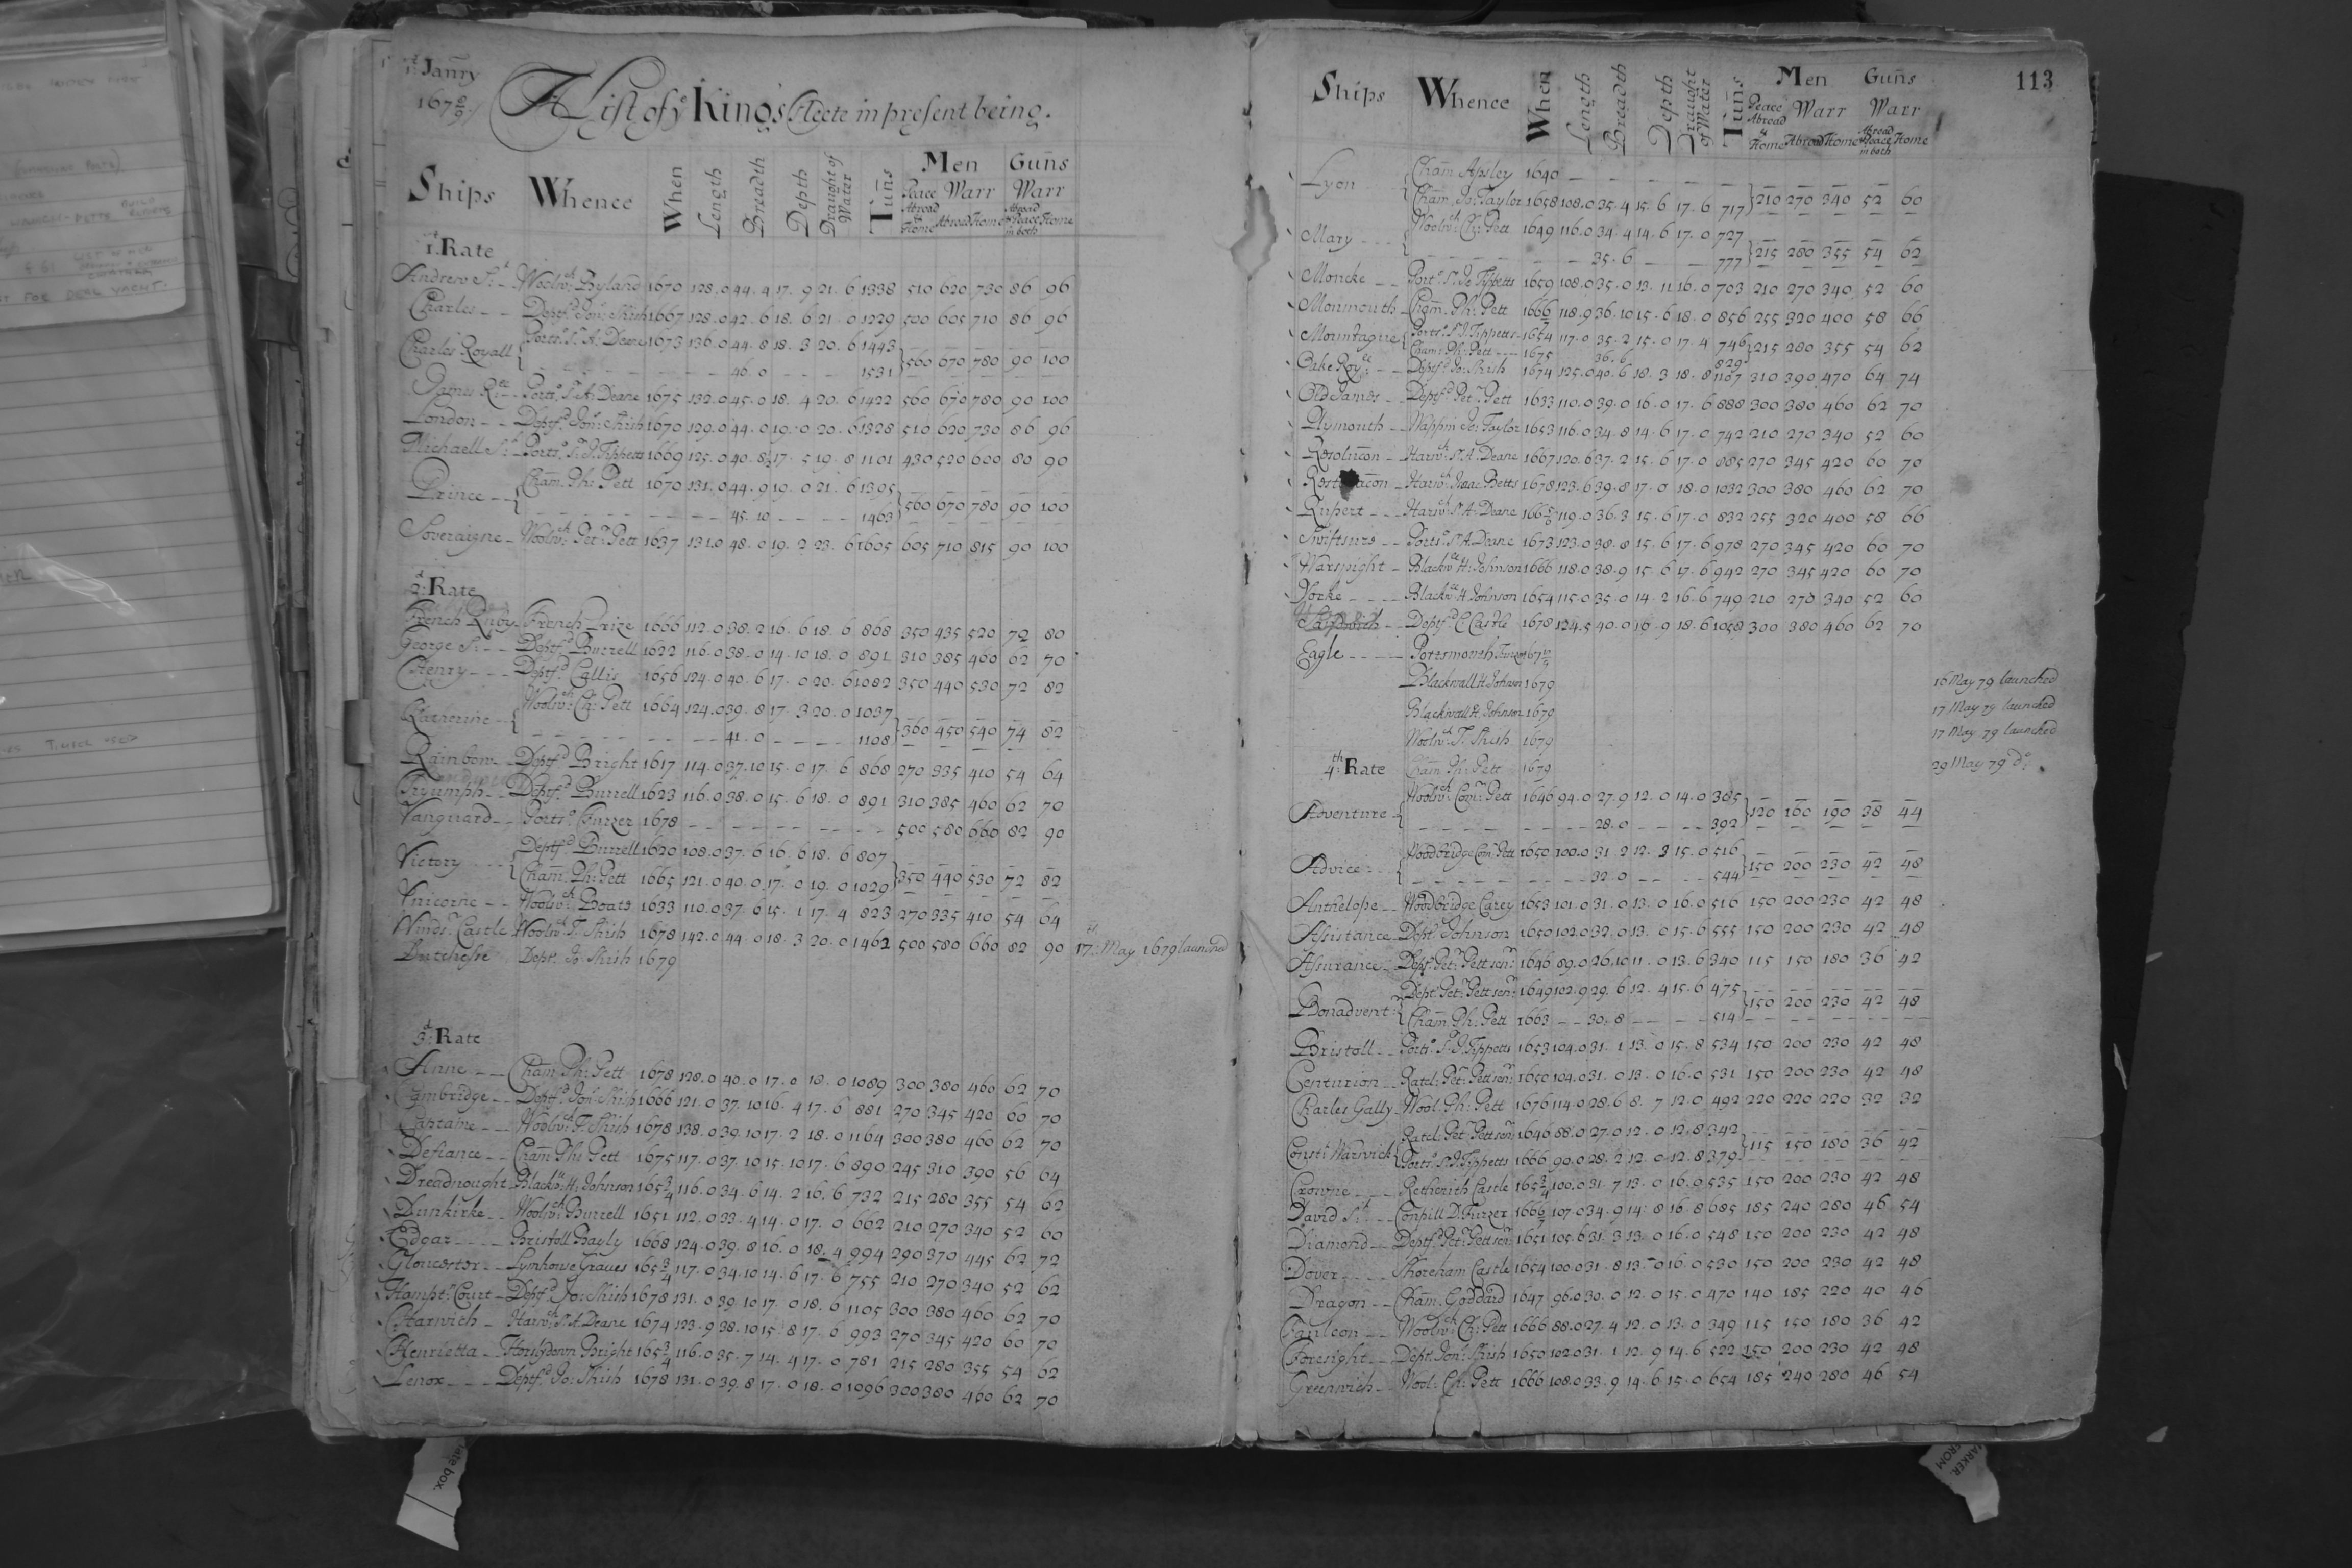 Black and White photo of a Fleet List report from ADM 8 volume 1